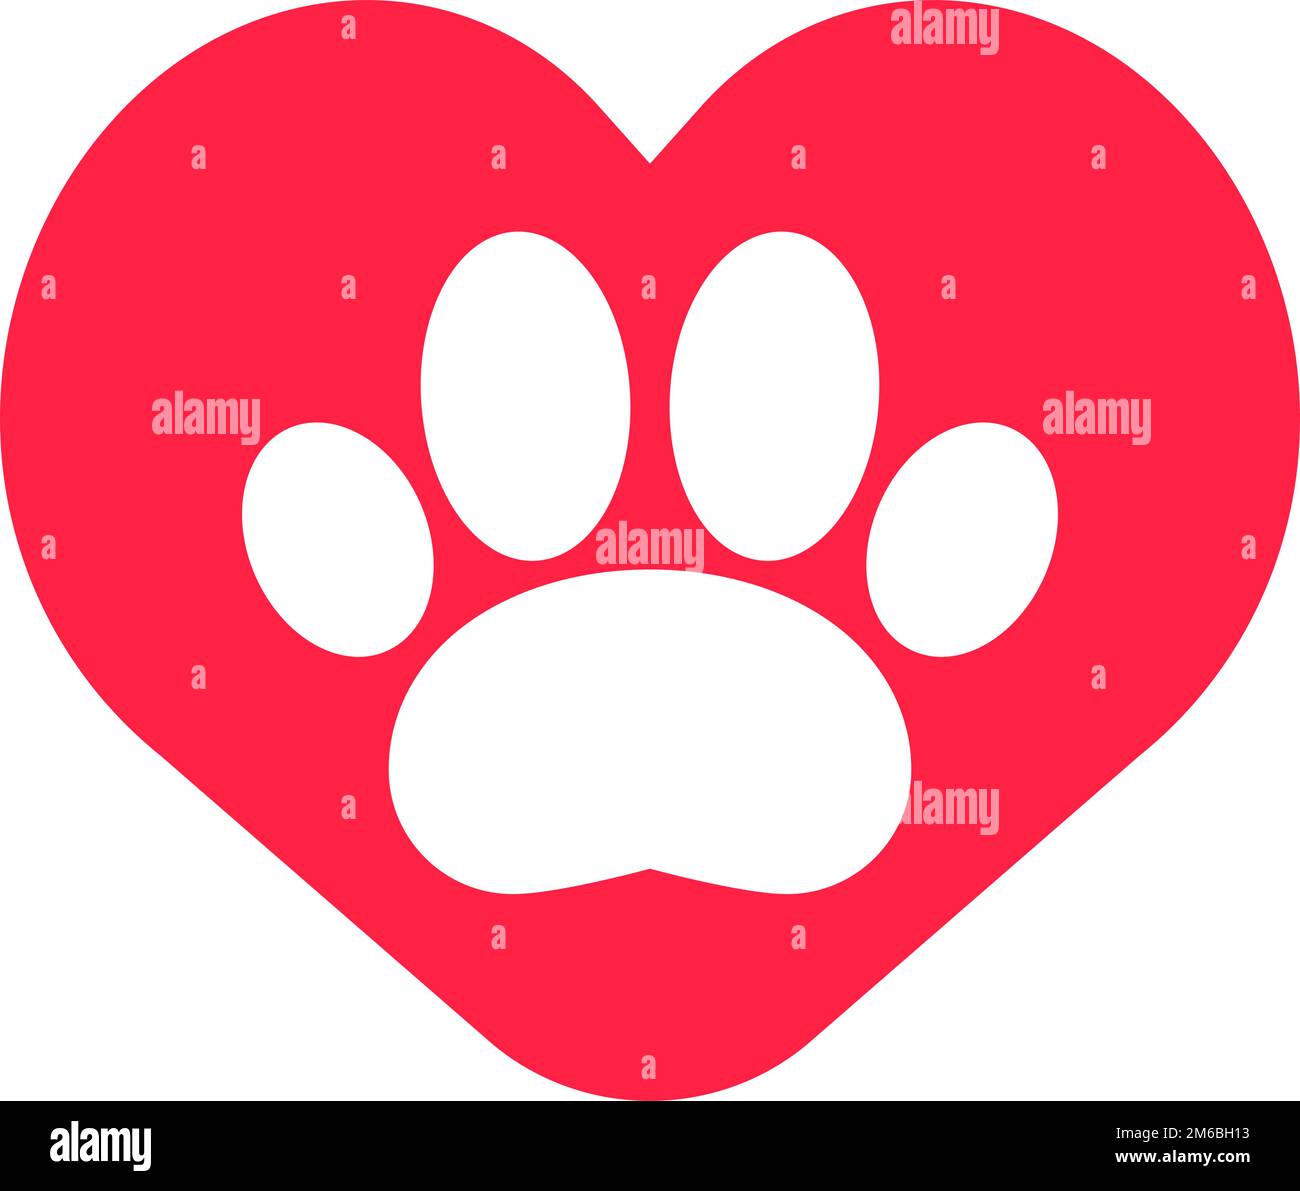 Love for animals. Animal Protection. Dog or cat paw and heart icons. Editable vector. Stock Vector